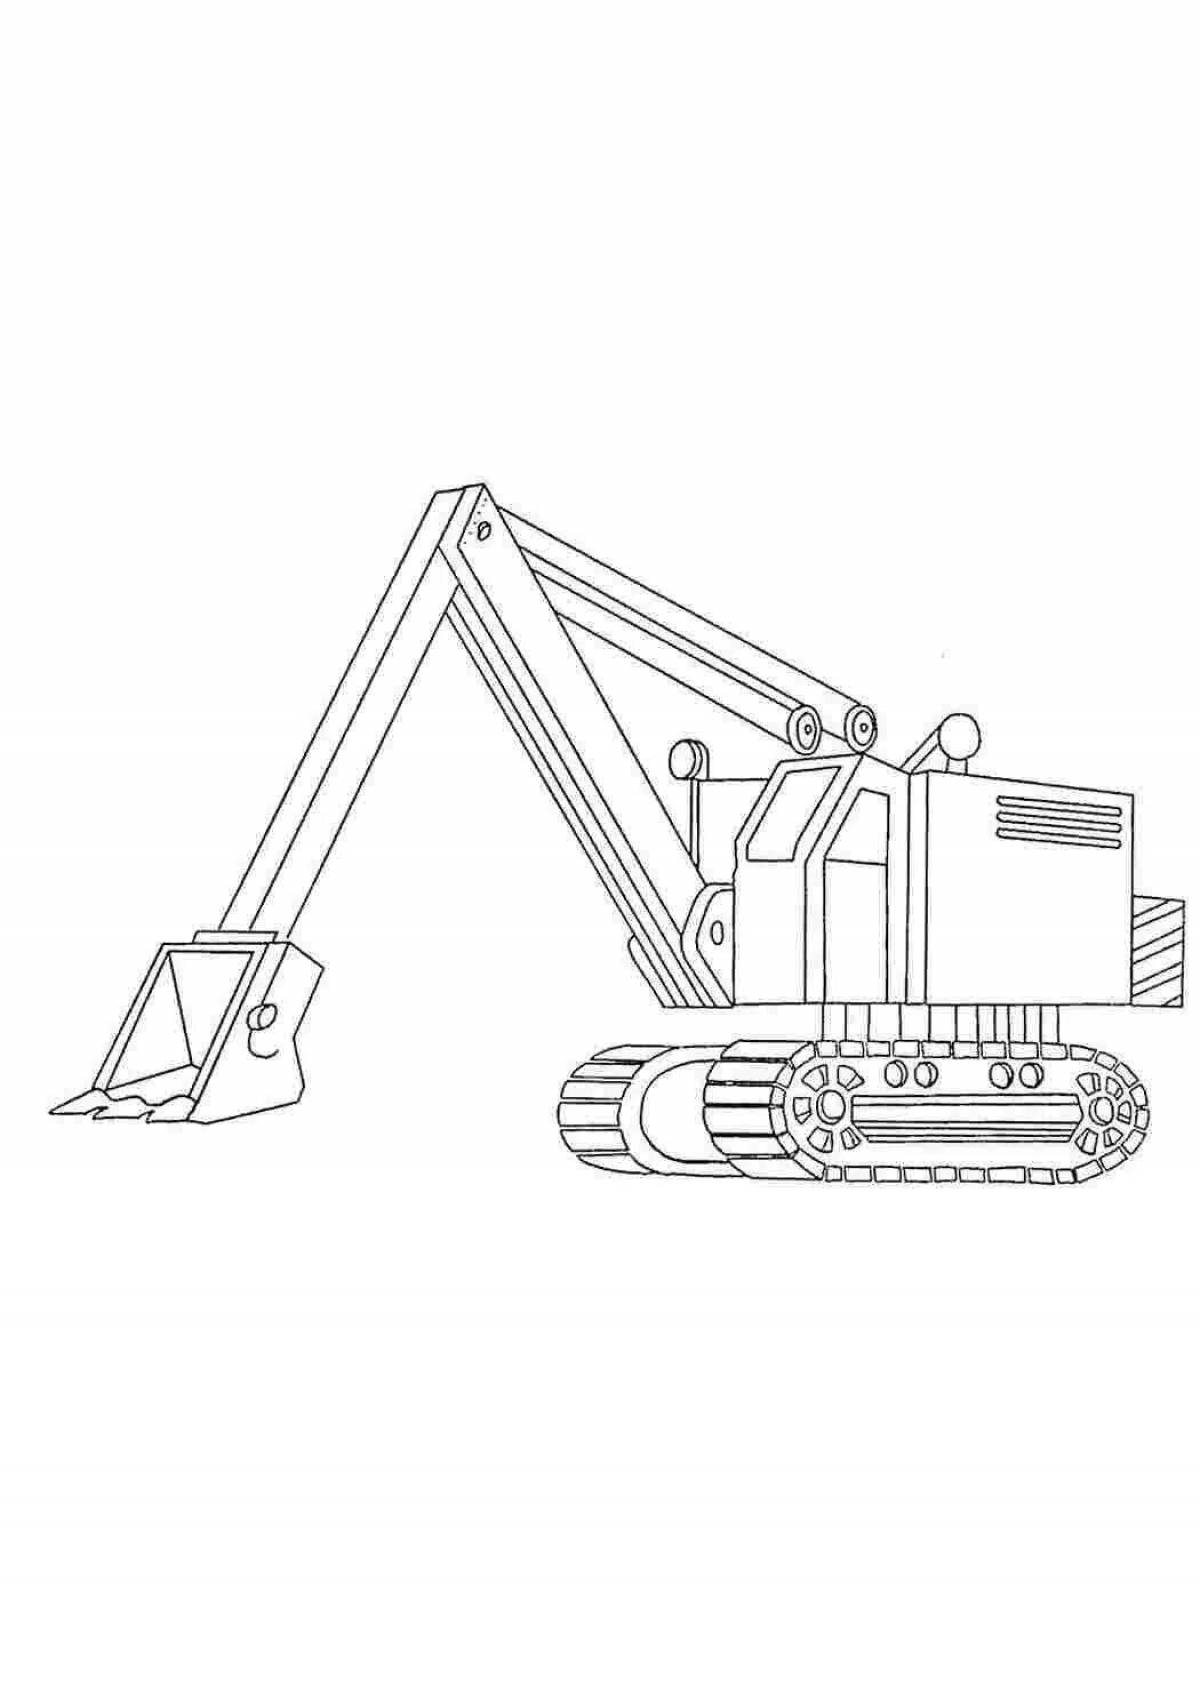 Animated excavator coloring page for boys